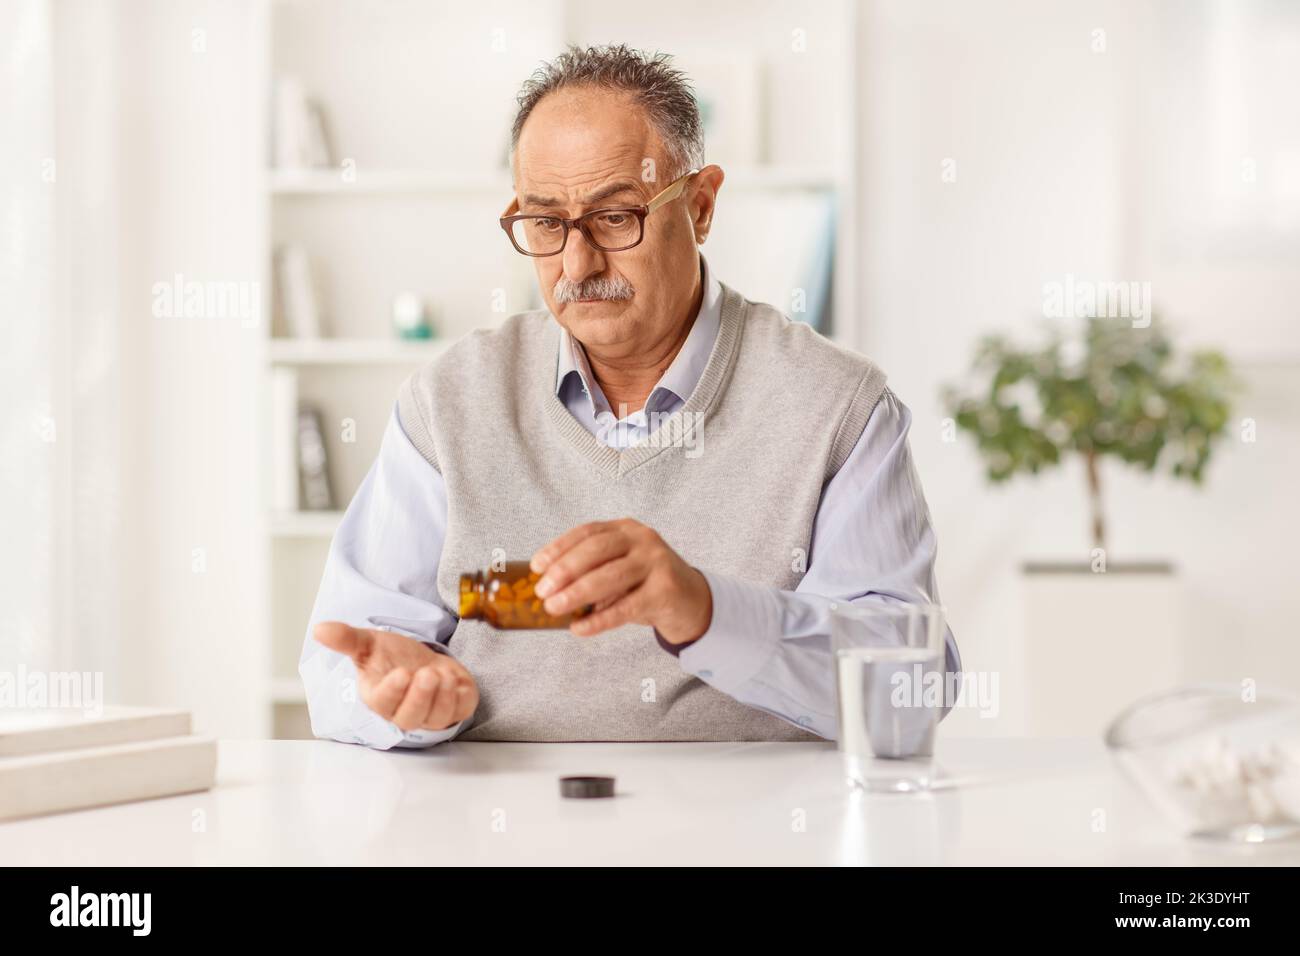 Pensive mature man at home taking pills from a bottle Stock Photo